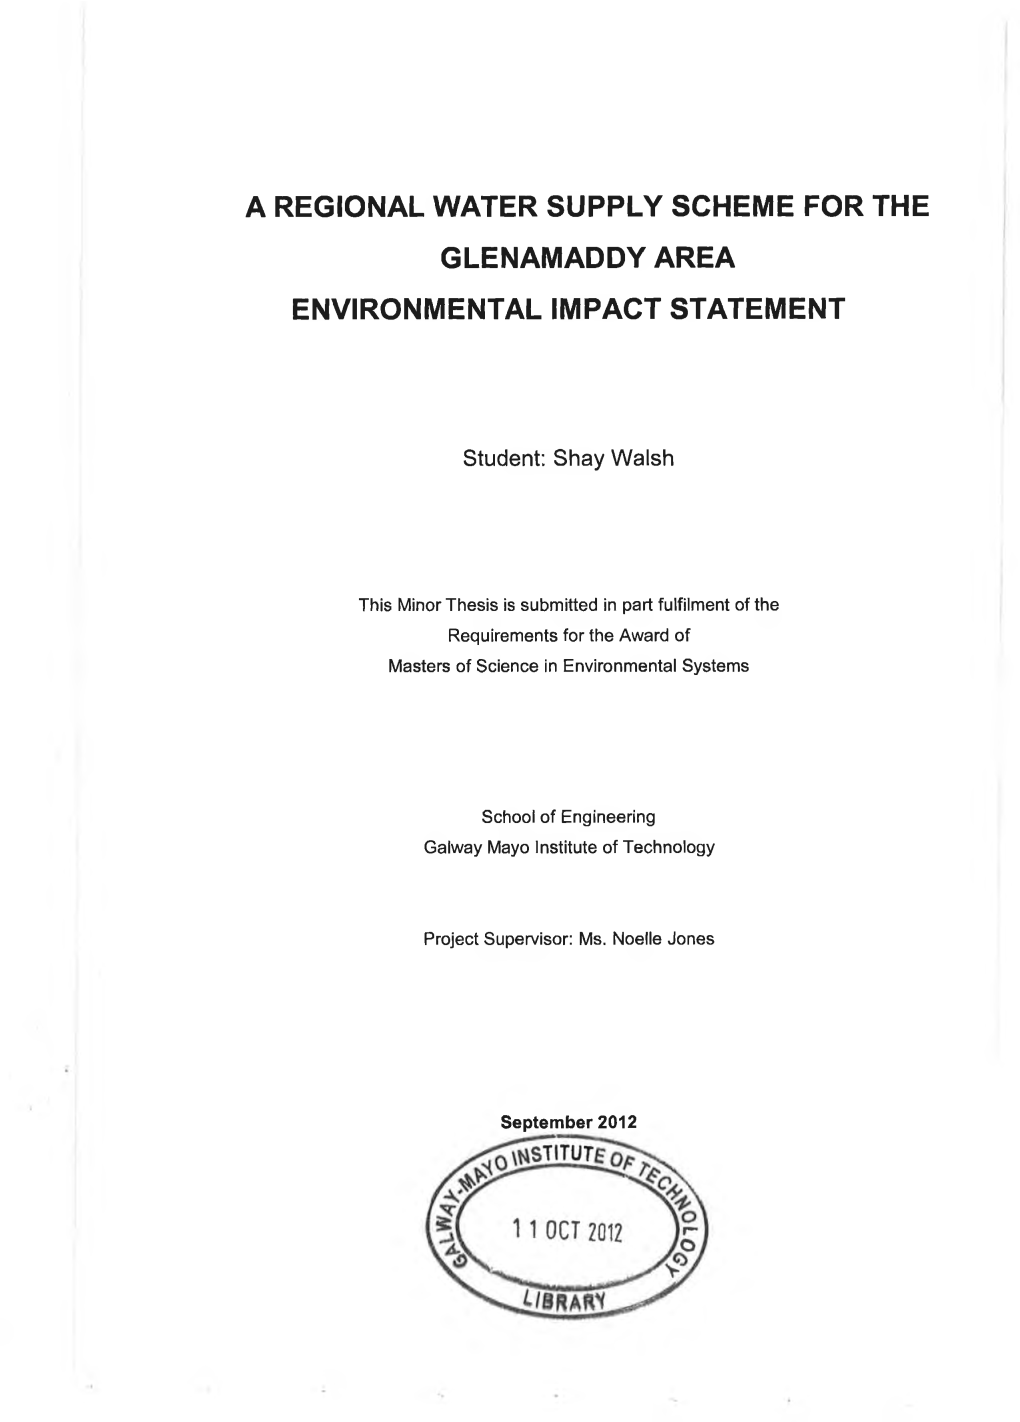 A Regional Water Supply Scheme for the Glenamaddy Area Environmental Impact Statement